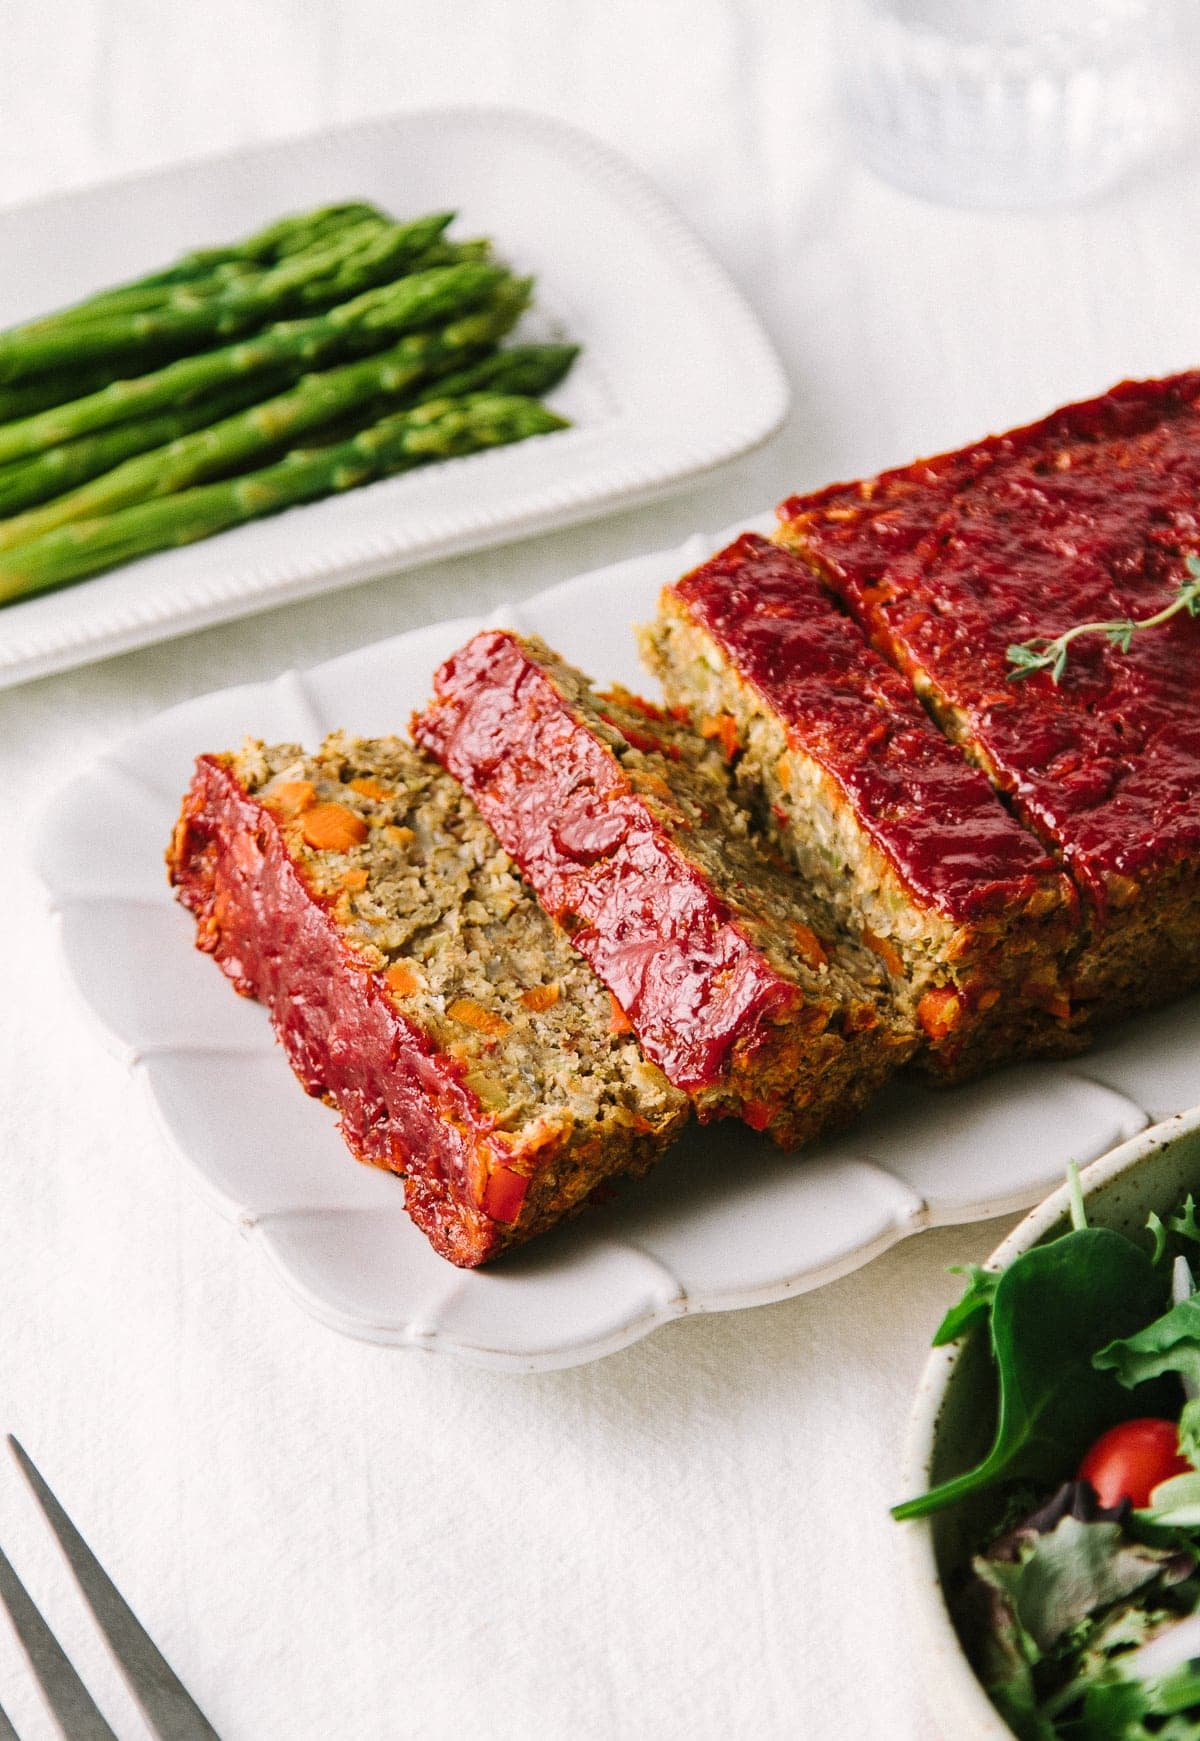 side angle view of vegetable lentil loaf cut into slices on a serving platter surrounded by side dishes.